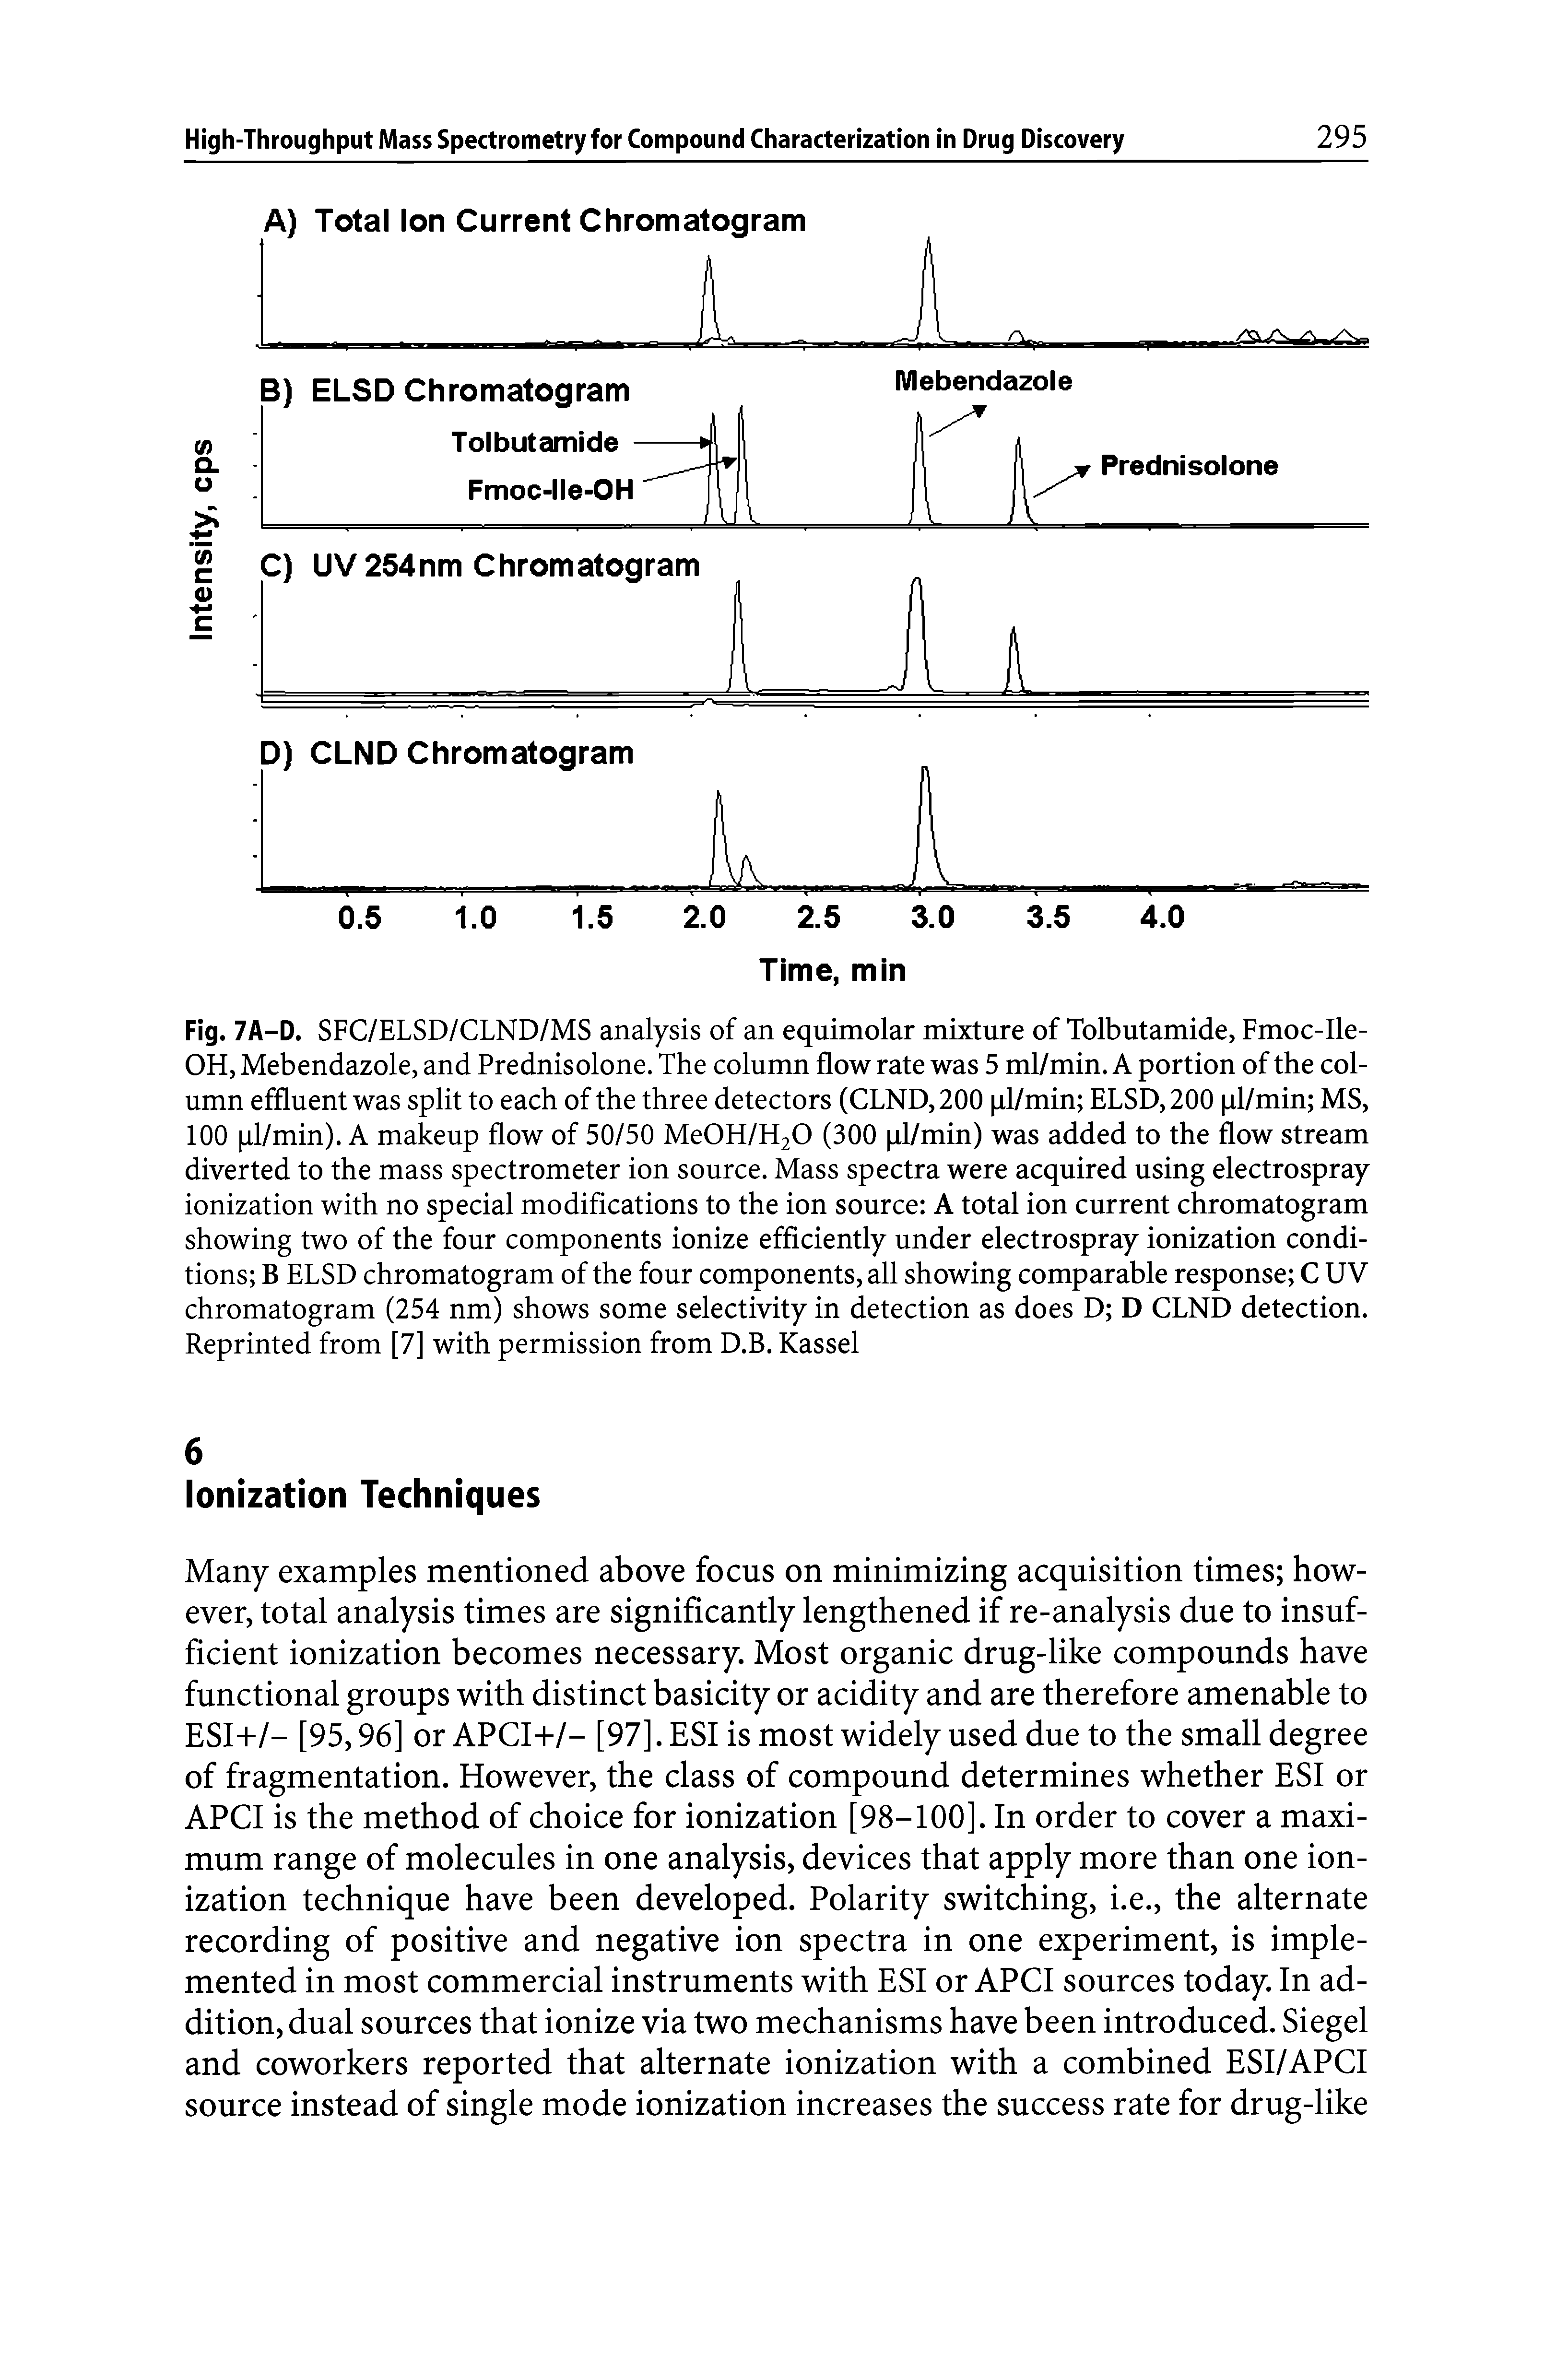 Fig. 7A-D. SFC/ELSD/CLND/MS analysis of an equimolar mixture of Tolbutamide, Fmoc-Ile-OH, Mebendazole, and Prednisolone. The column flow rate was 5 ml/min. A portion of the column effluent was split to each of the three detectors (CLND, 200 pl/min ELSD,200 pl/min MS, 100 pl/min). A makeup flow of 50/50 MeOH/H20 (300 pl/min) was added to the flow stream diverted to the mass spectrometer ion source. Mass spectra were acquired using electrospray ionization with no special modifications to the ion source A total ion current chromatogram showing two of the four components ionize efficiently under electrospray ionization conditions B ELSD chromatogram of the four components, all showing comparable response C UV chromatogram (254 nm) shows some selectivity in detection as does D D CLND detection. Reprinted from [7] with permission from D.B. Kassel...